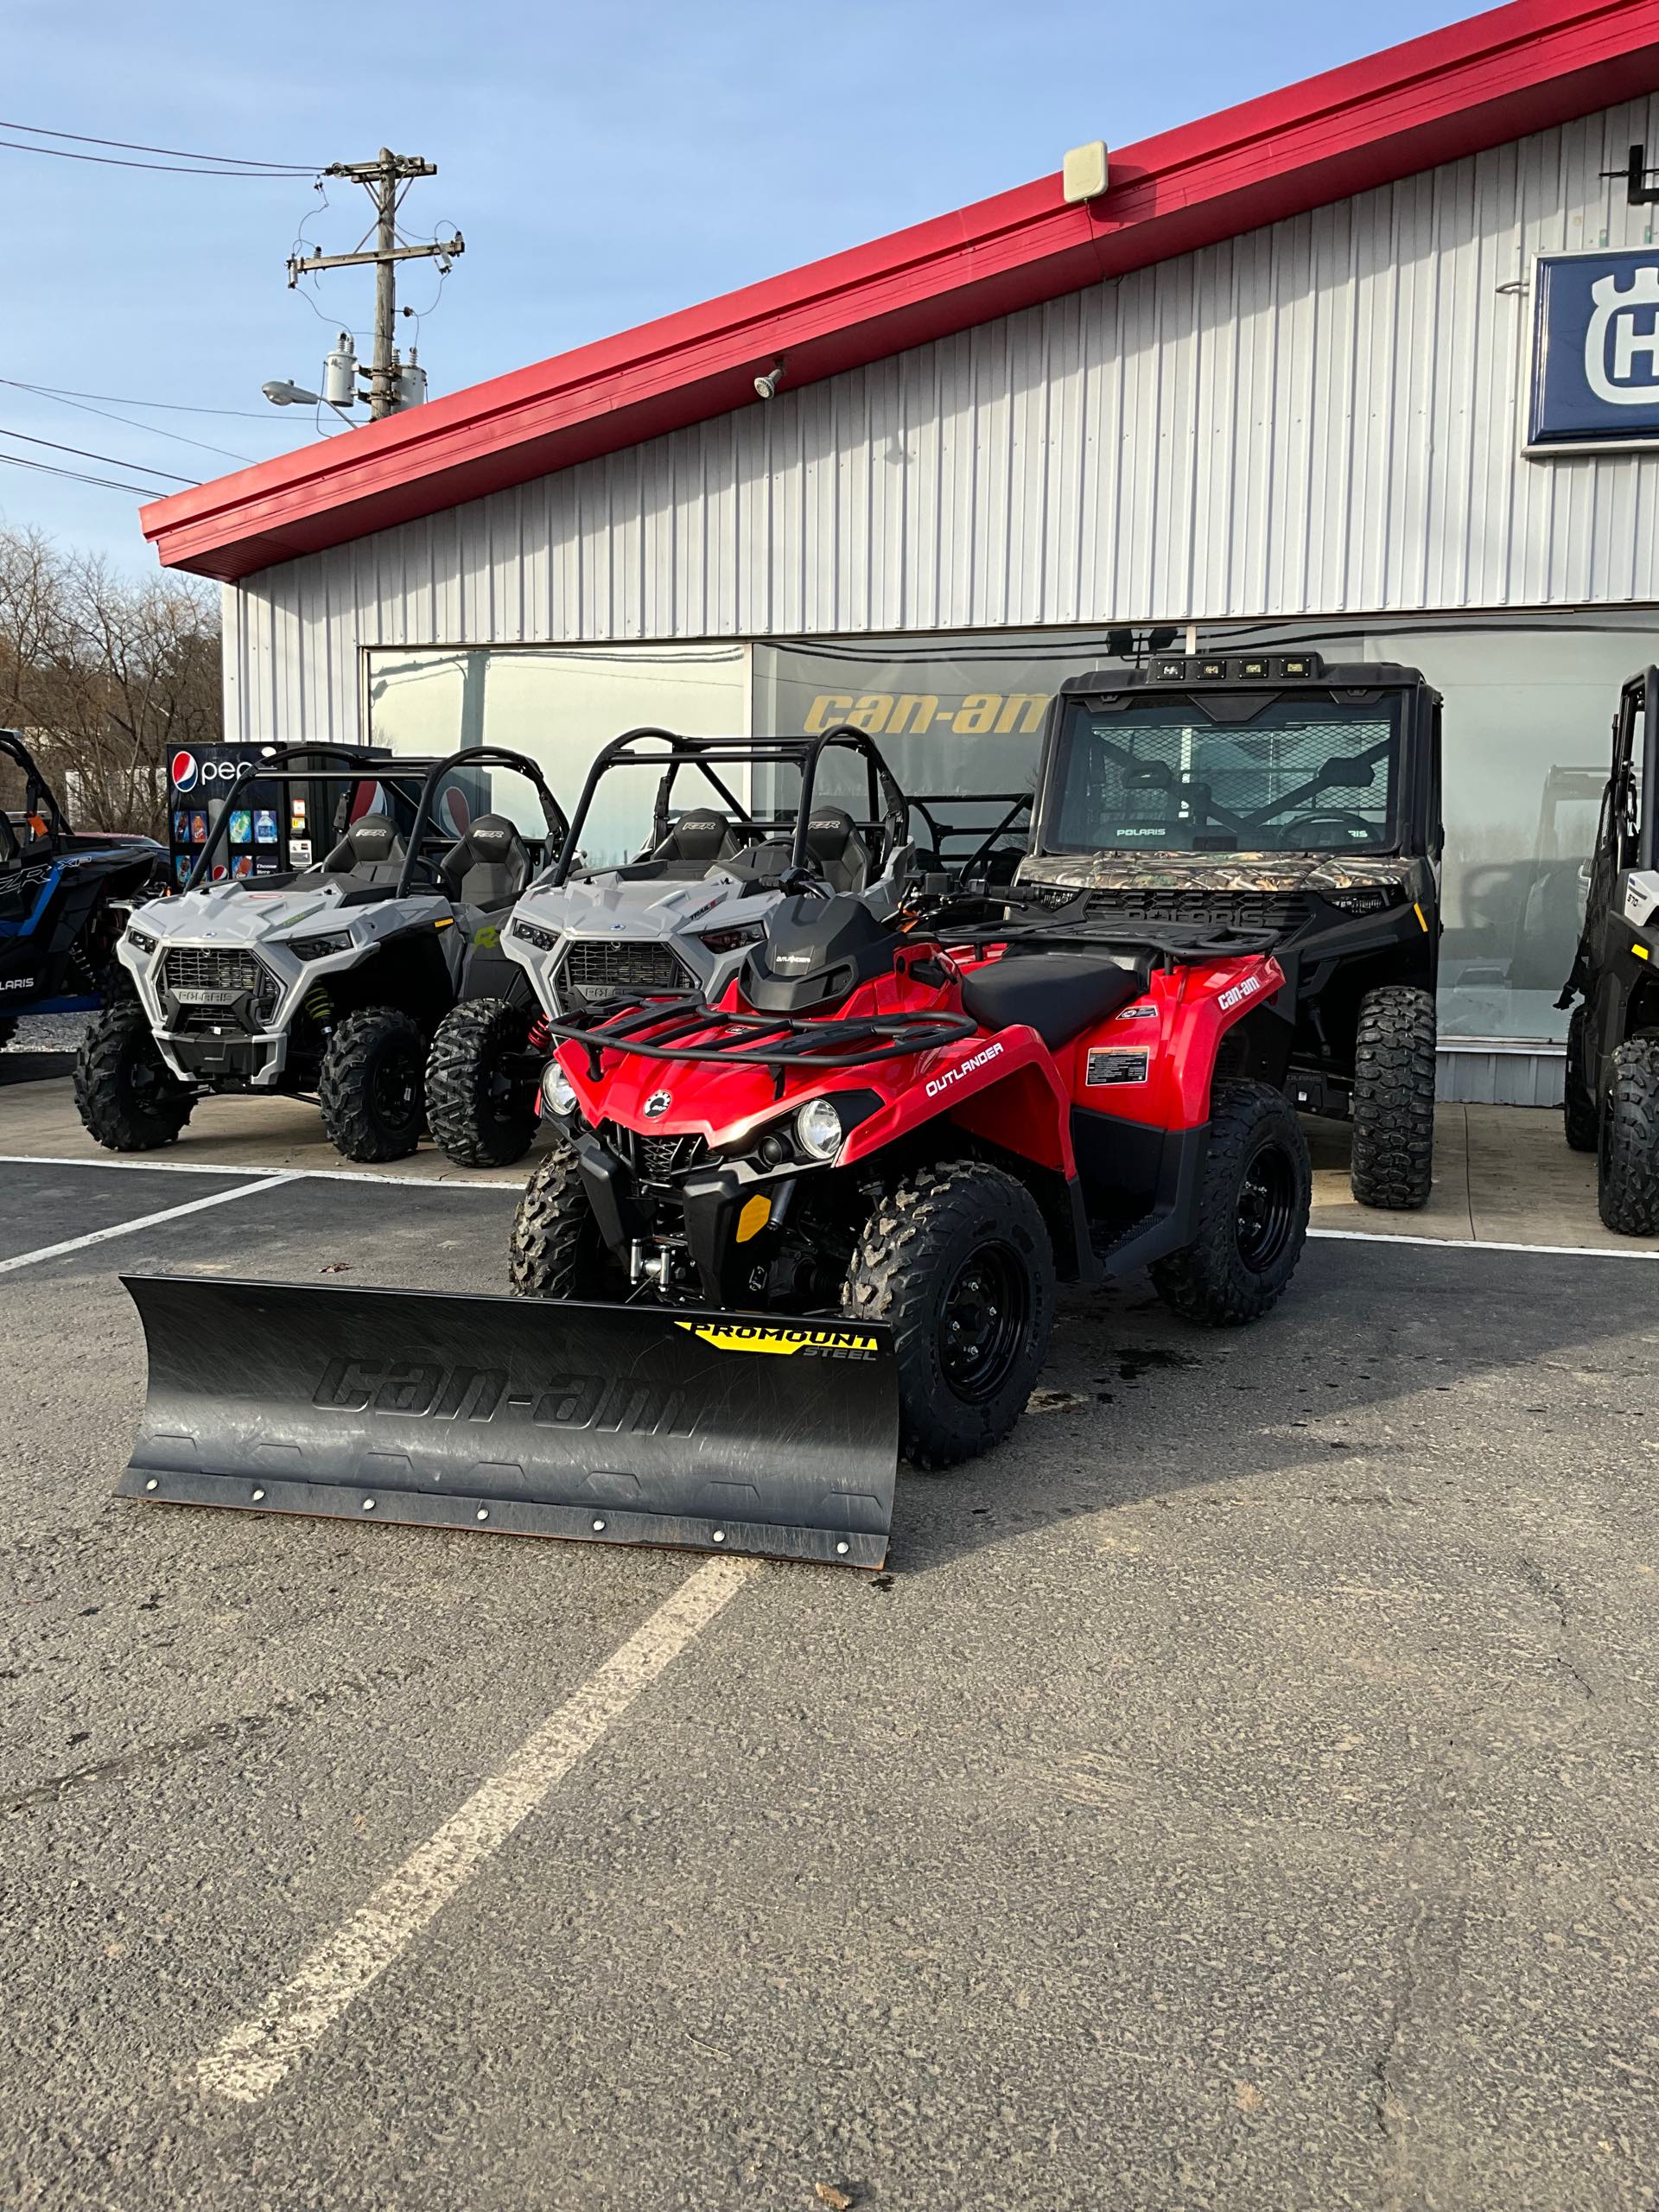 2022 Can-Am Outlander 450 at Leisure Time Powersports of Corry